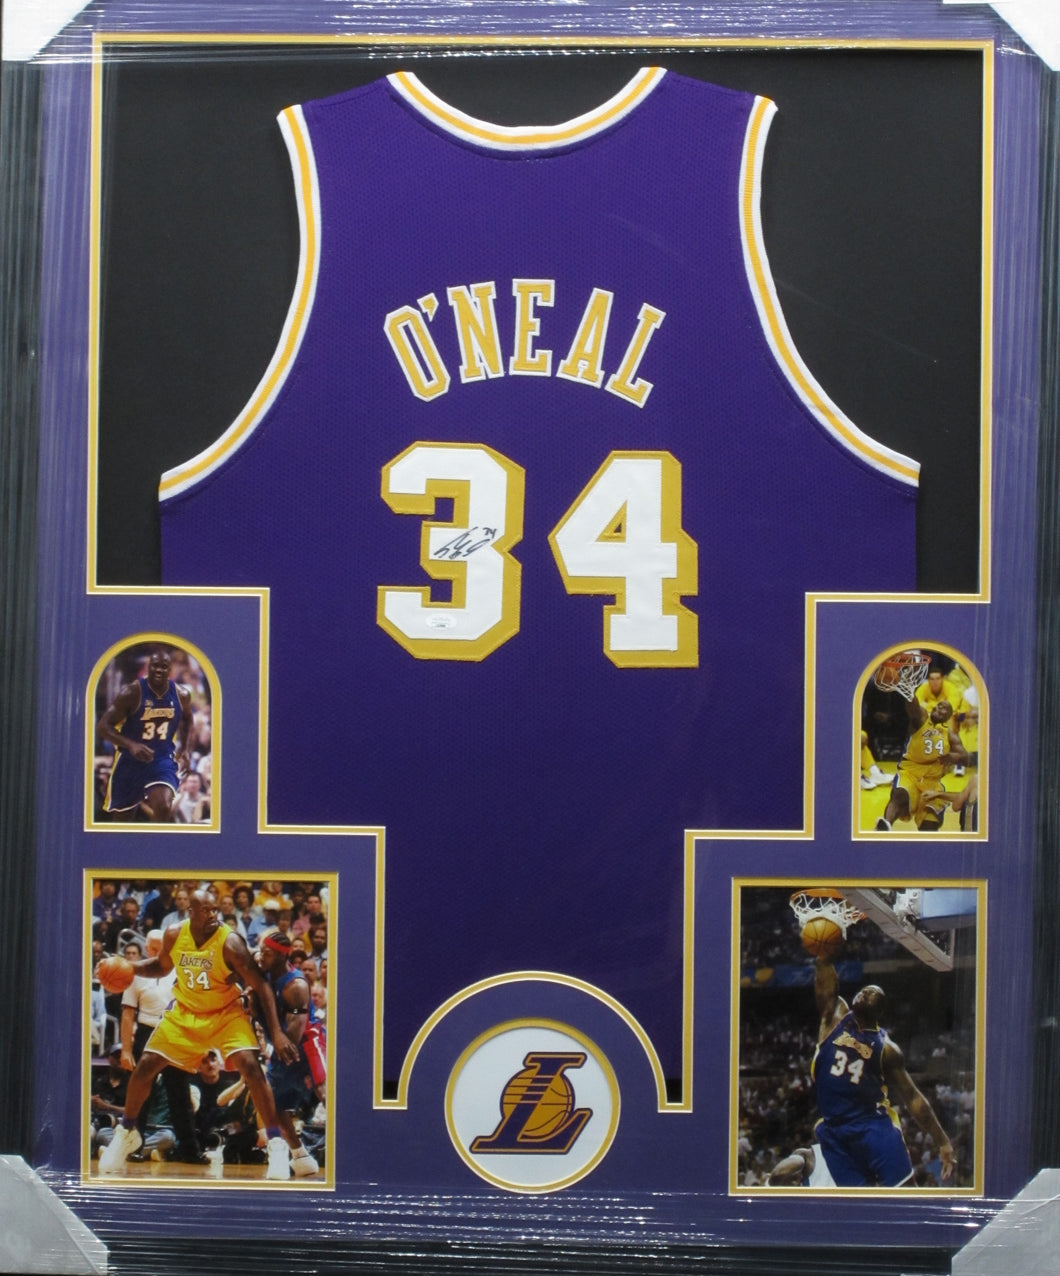 Los Angeles Lakers Shaquille O'Neal Signed Jersey Framed & Matted with JSA COA